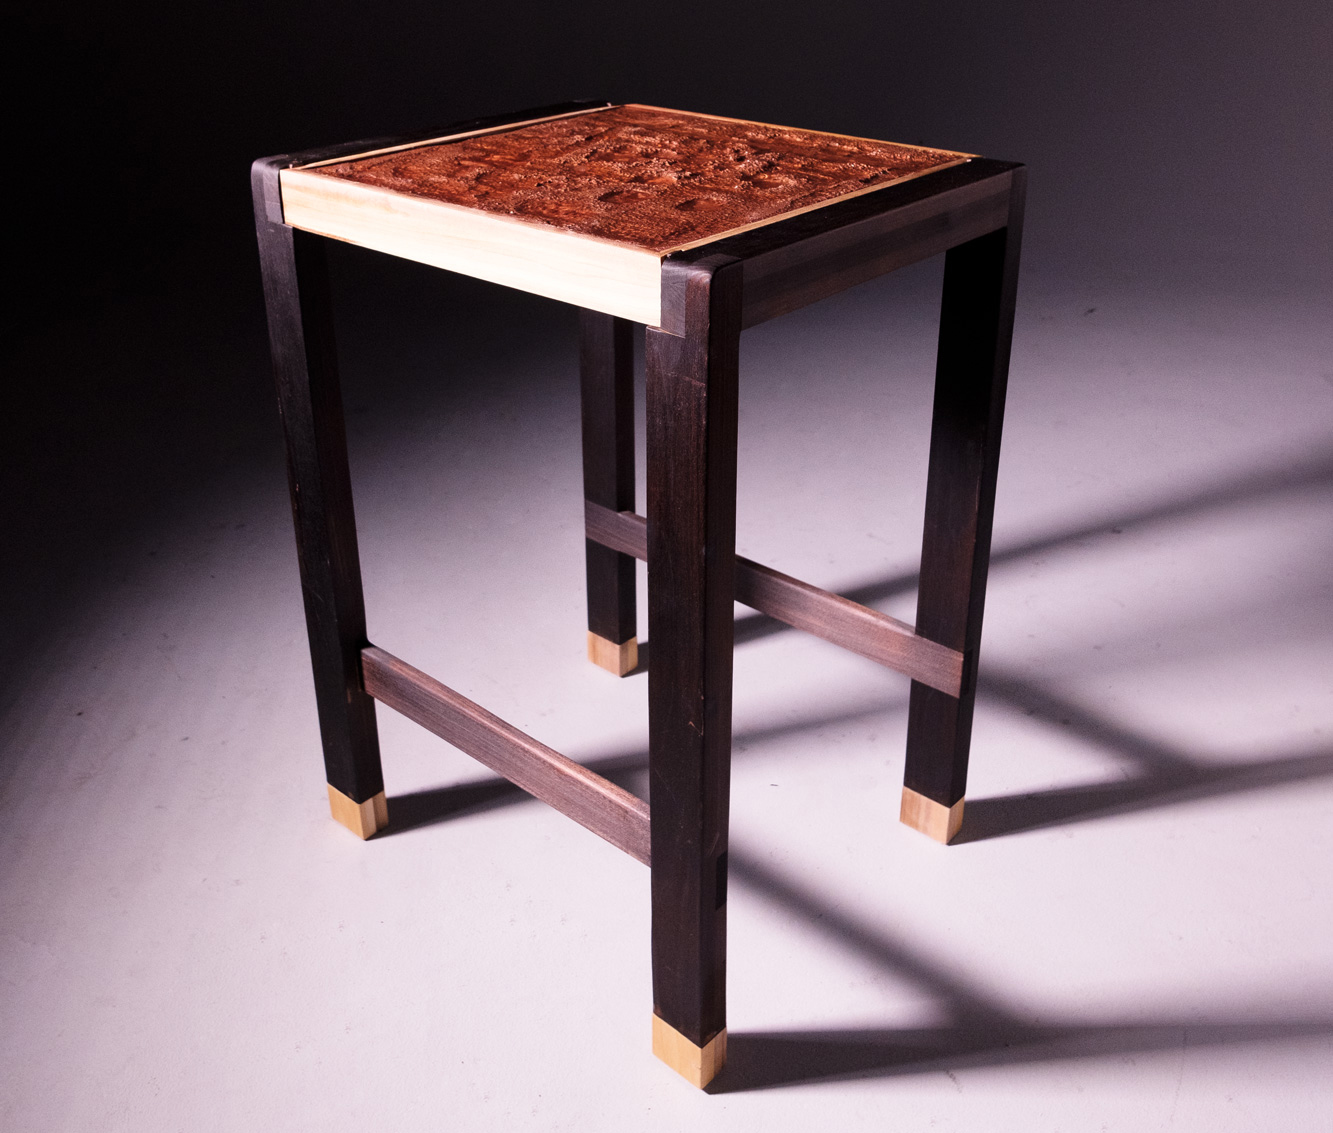 Stool made from wood